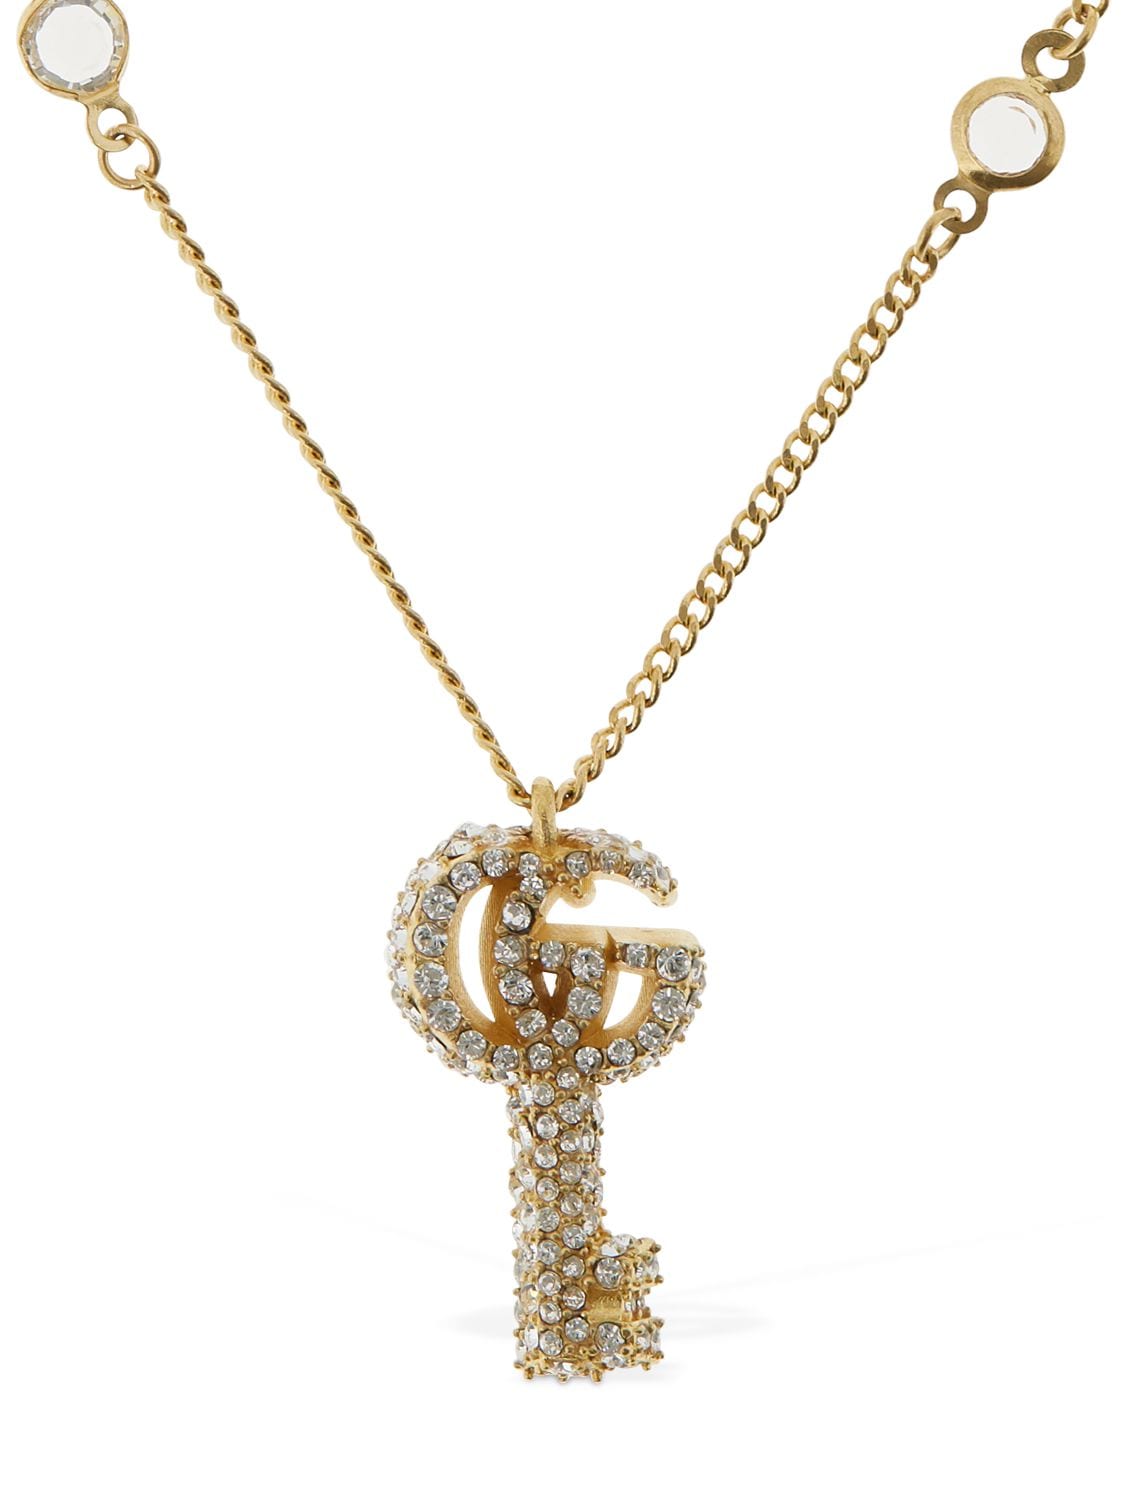 Double G Key Necklace W/ Crystals